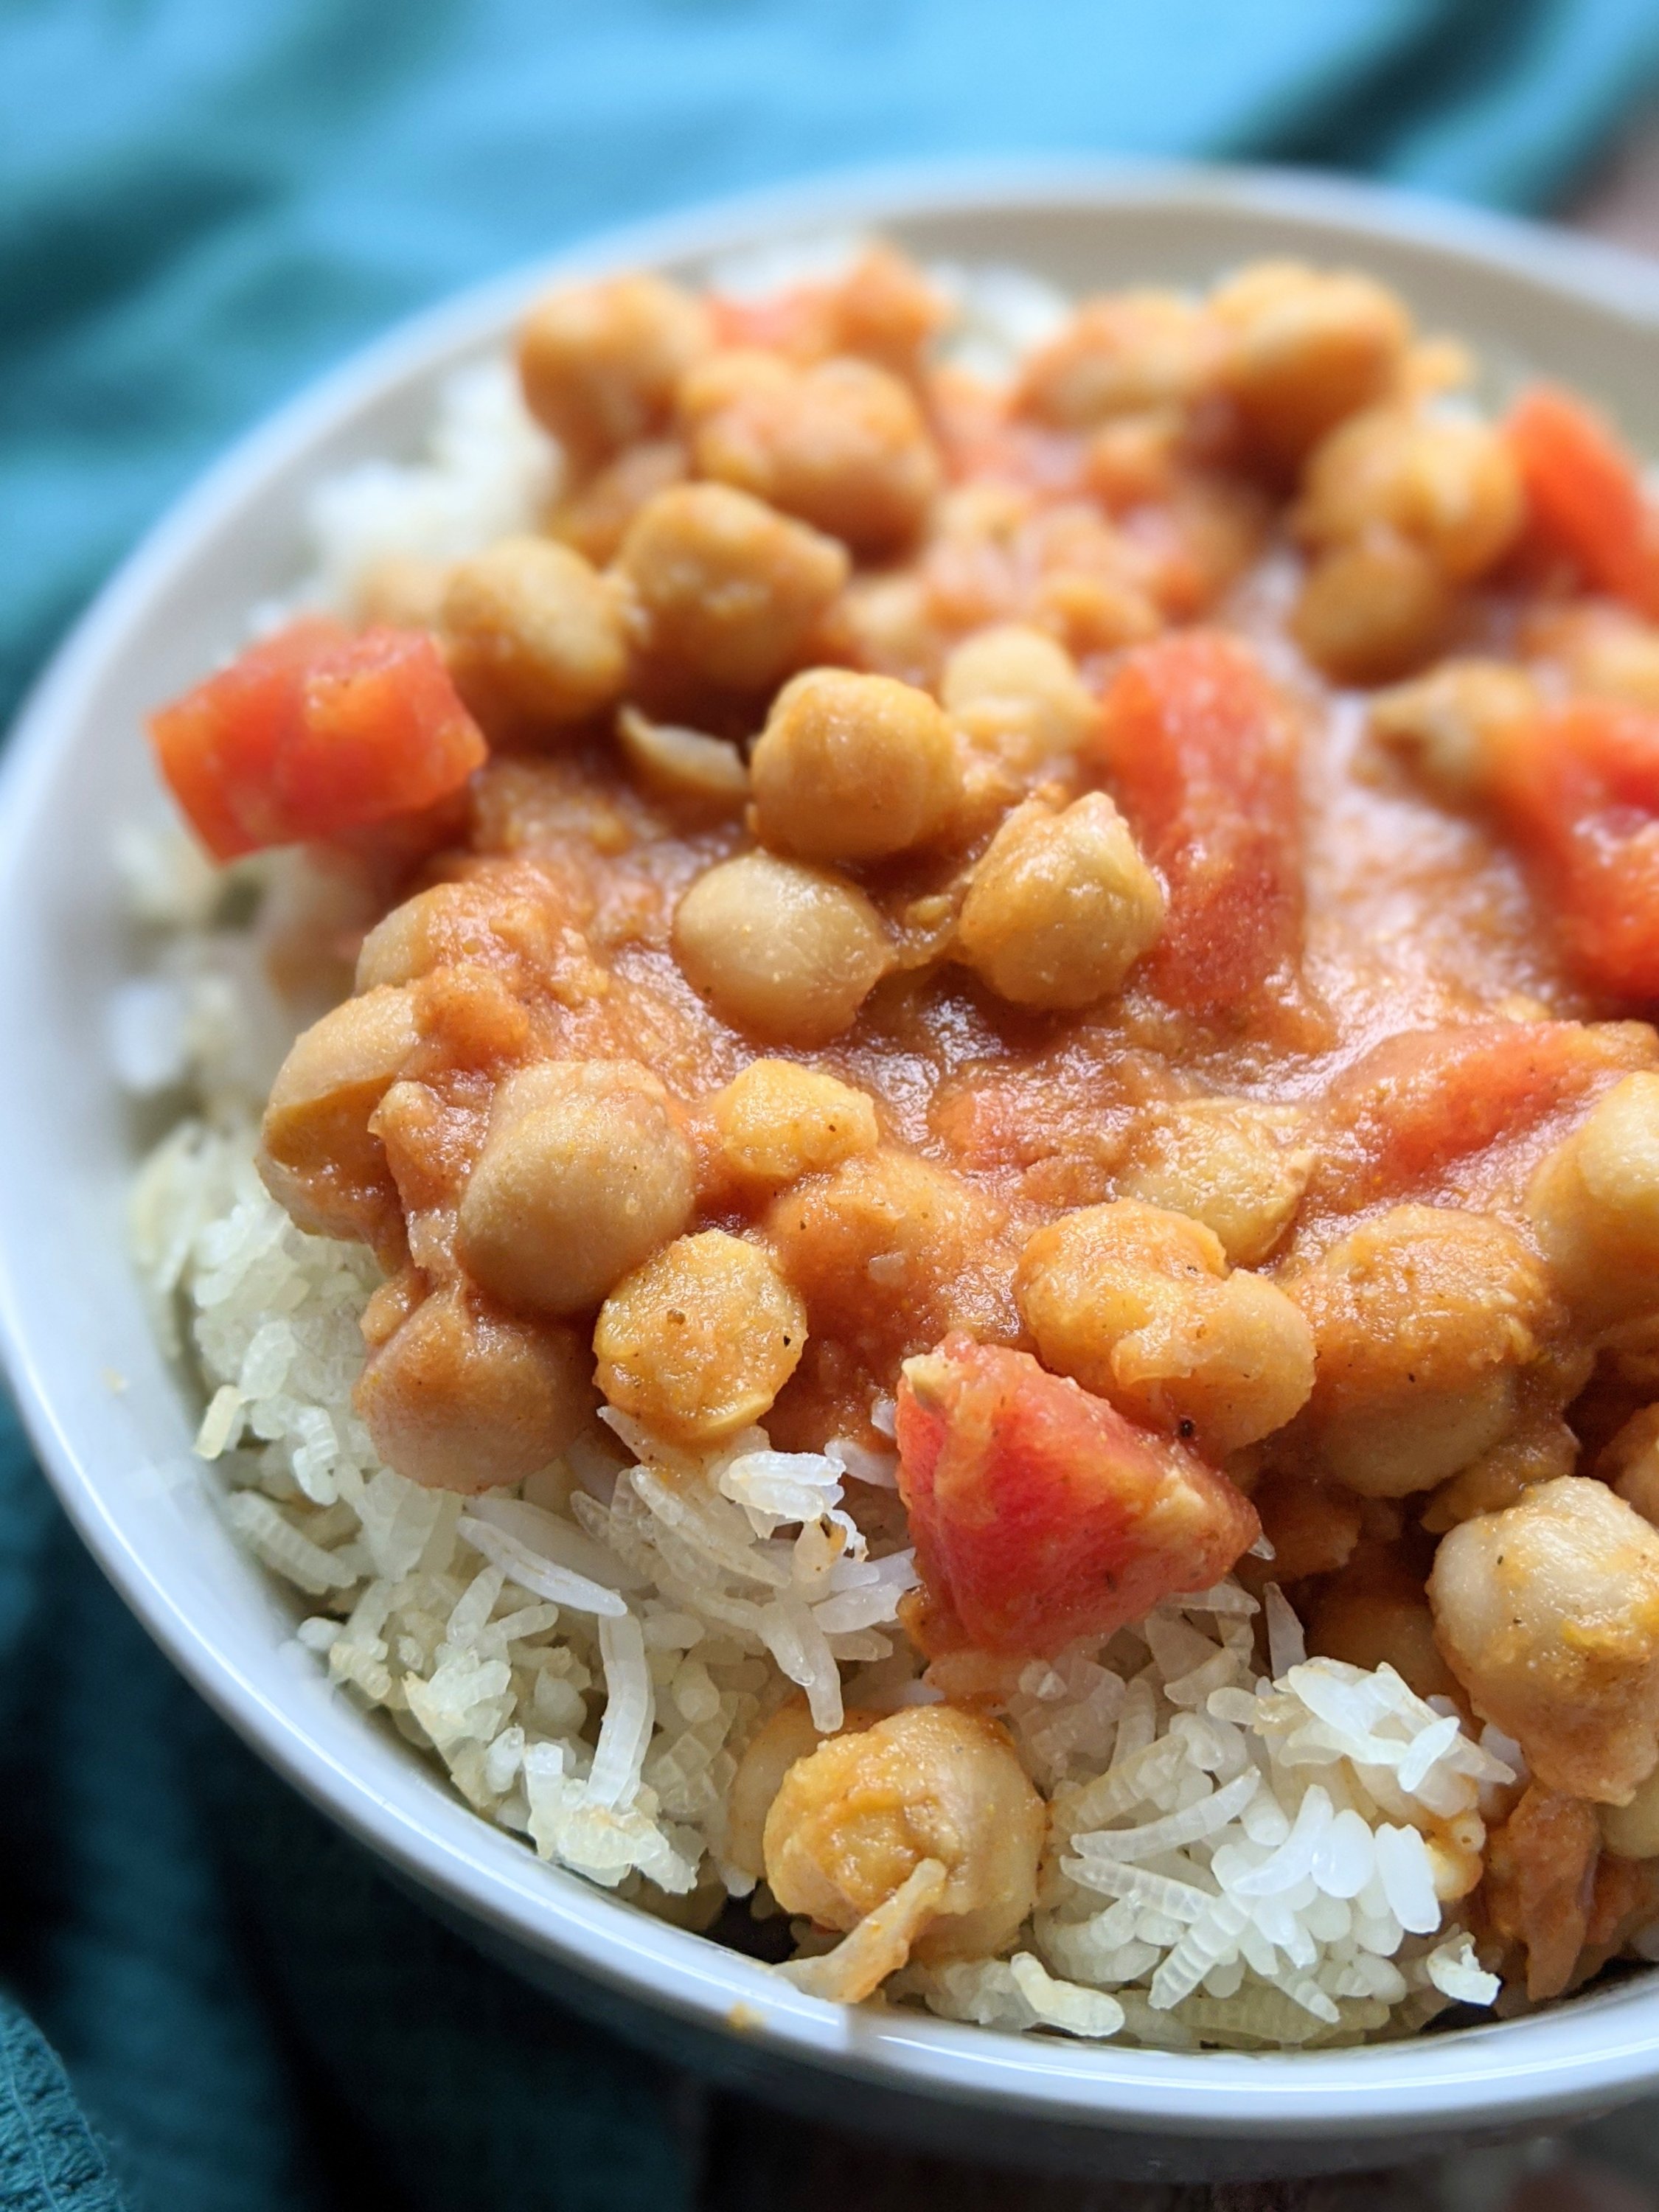 healthy recipes with canned chickpeas vegan vegetarian gluten free dairy free indian chickpea curry chana masala tikka masala spices garam healthy 